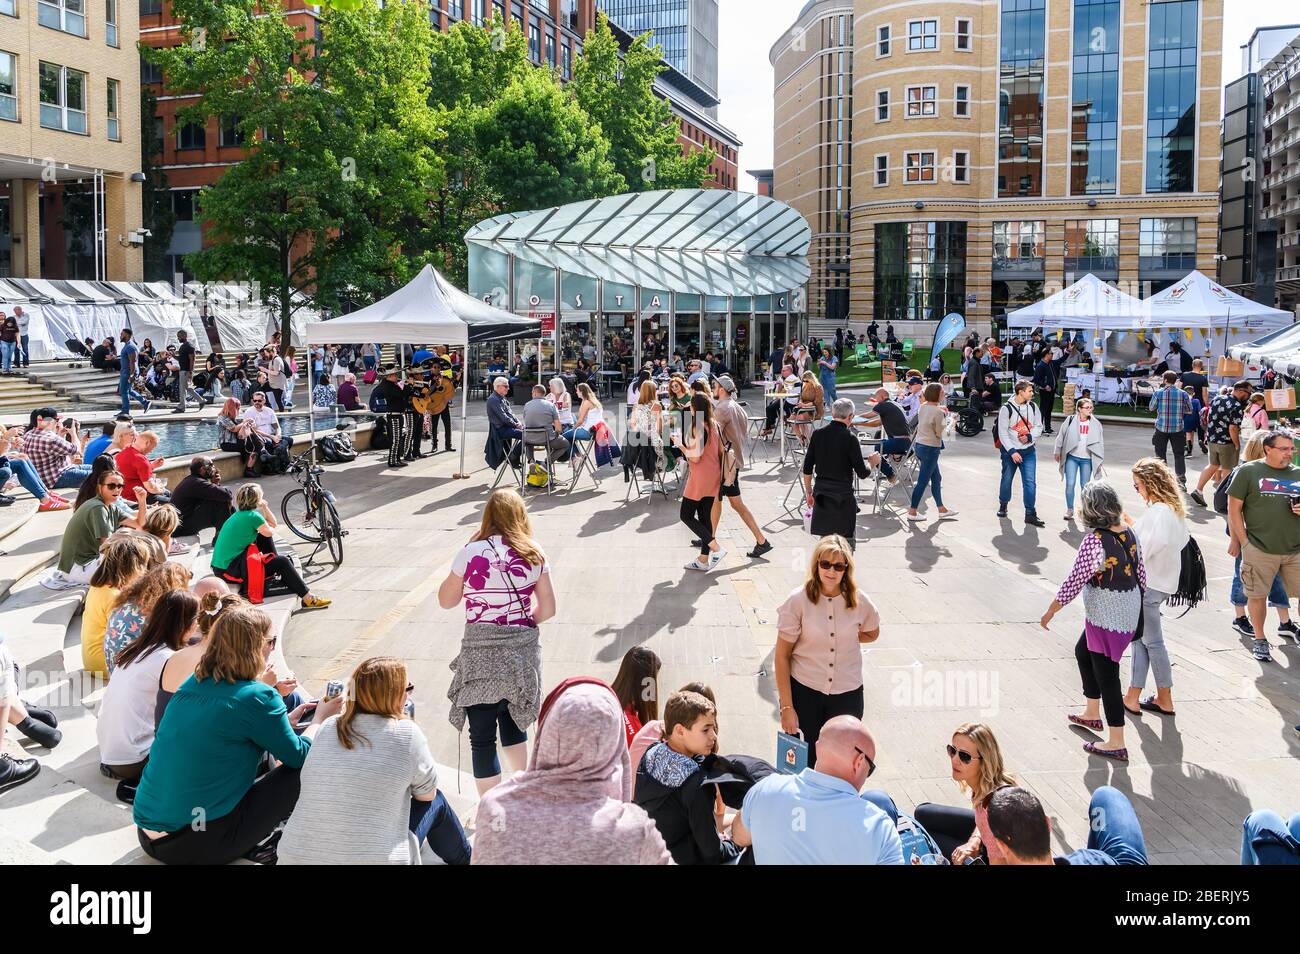 A busy and crowded Brindleyplace in Birmingham City Centre during a summer food and drink festival Stock Photo